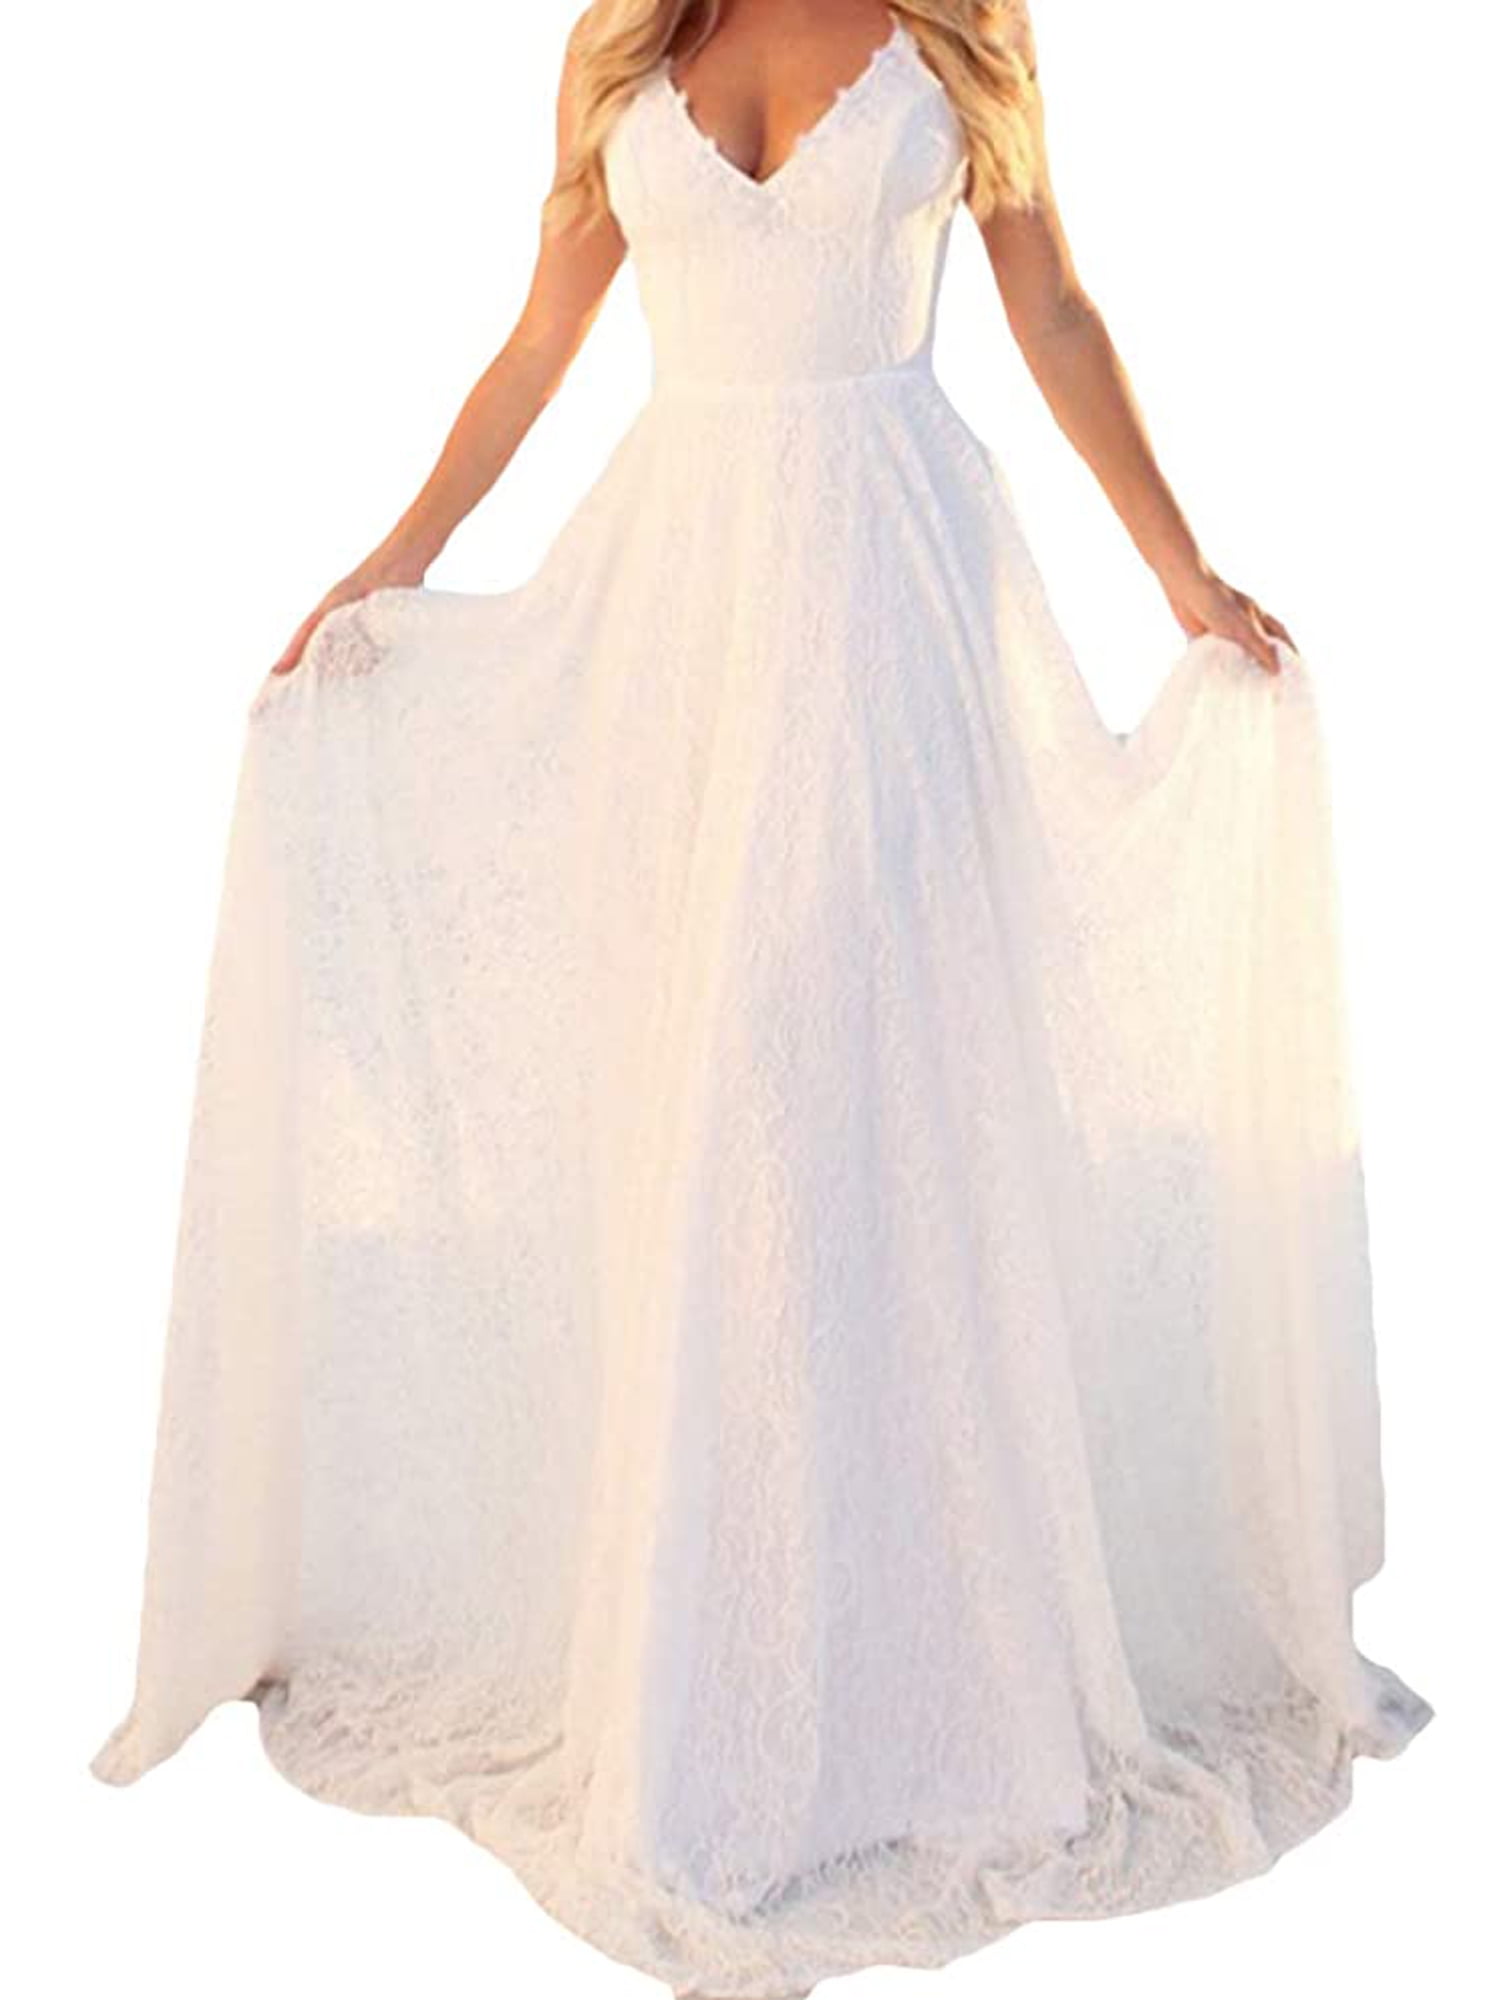 Ladies Sleeveless Wedding Maxi Dress Bridal Lace Gown Ball Formal Party Dress 